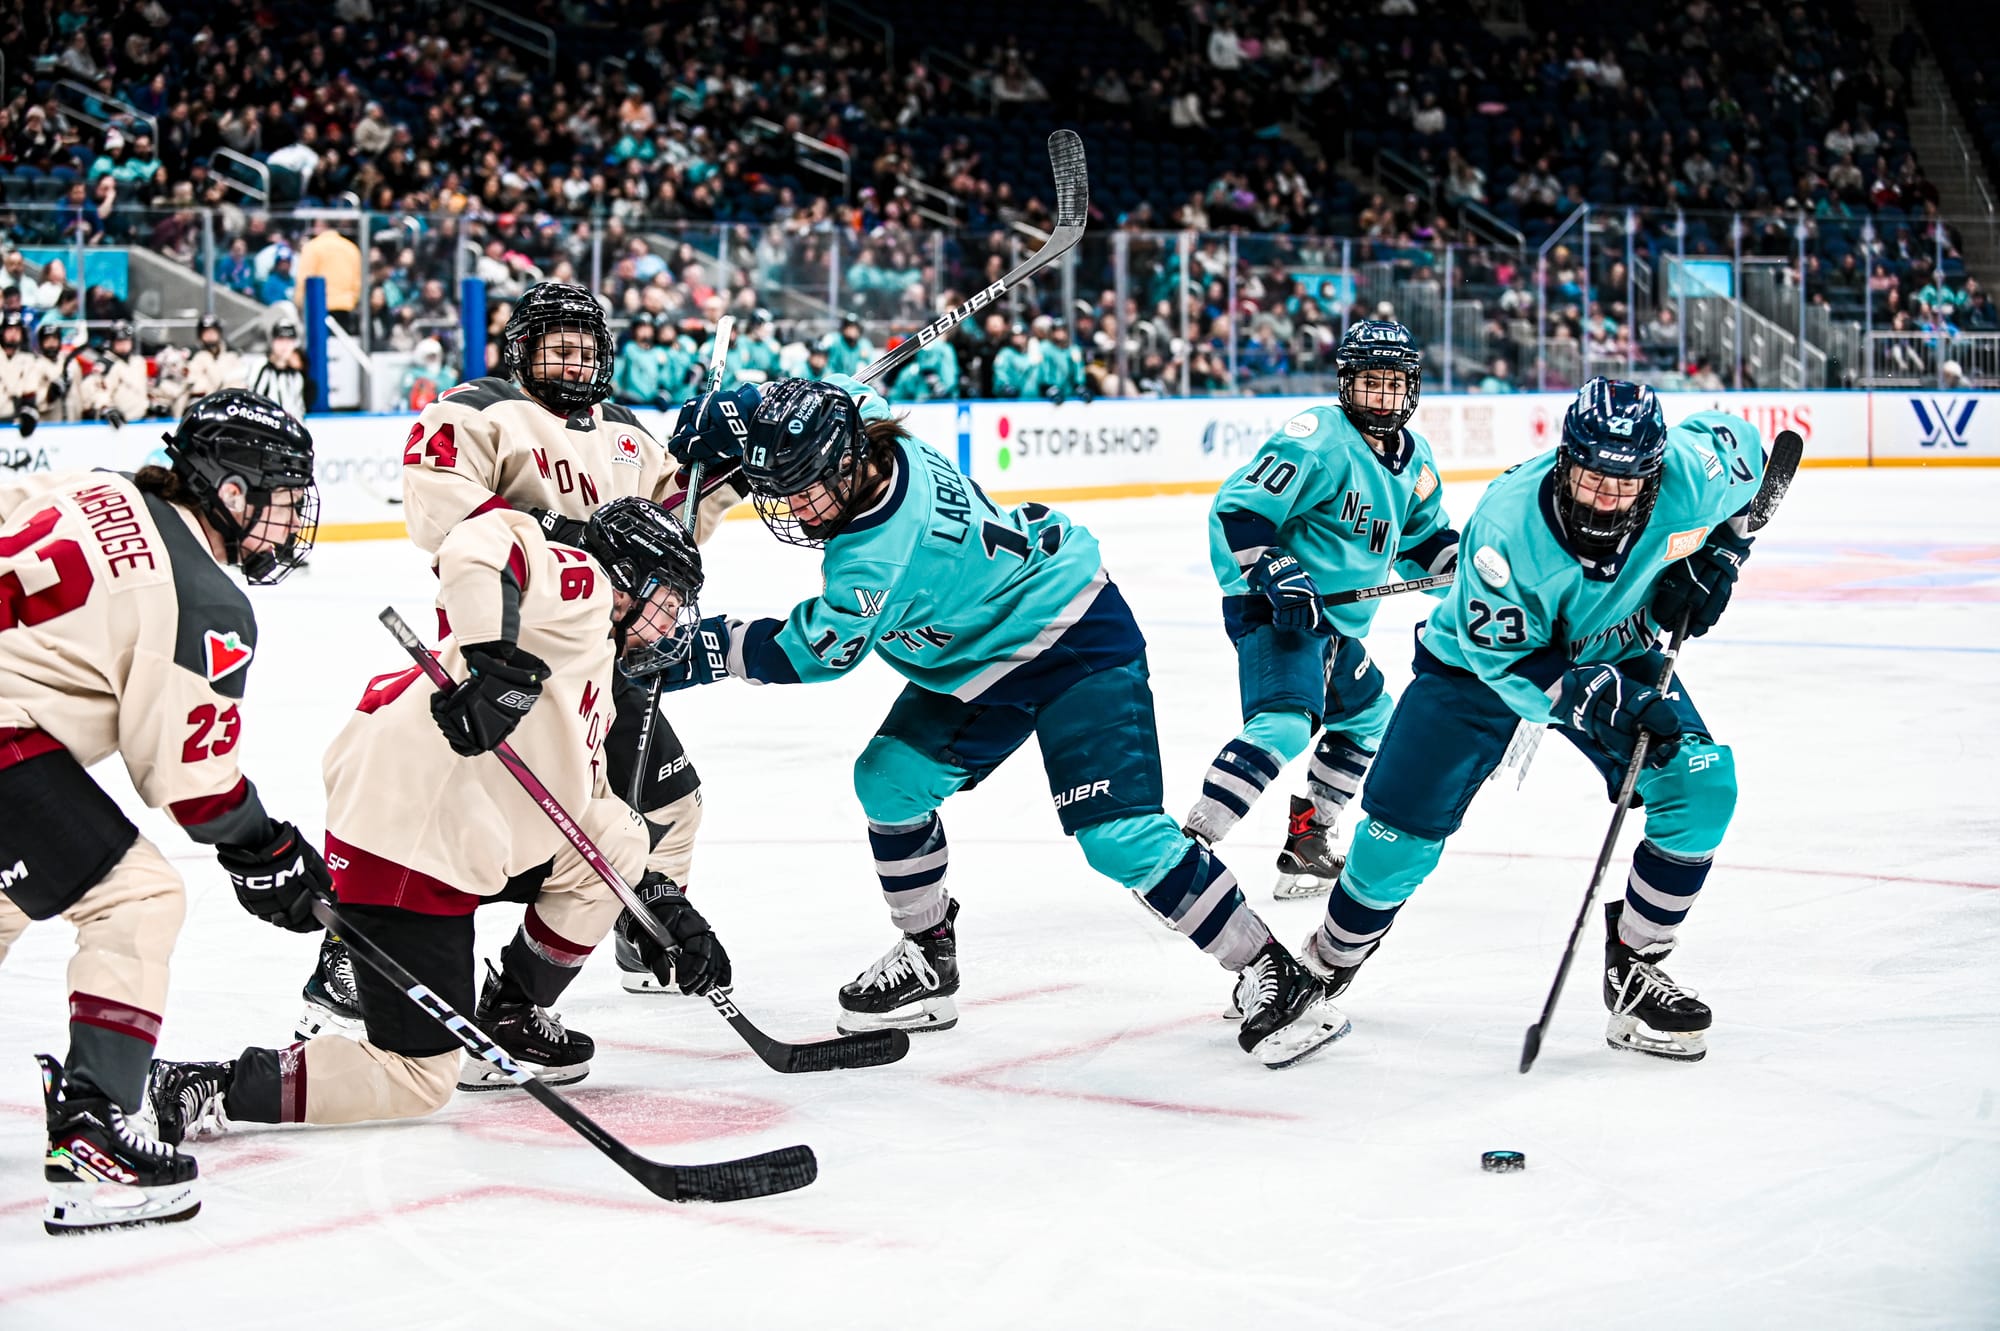 Madison Packer goes for the puck as other New York and Montréal players battle. The New York players are in teal home uniforms, while Montréal is wearing cream away uniforms.